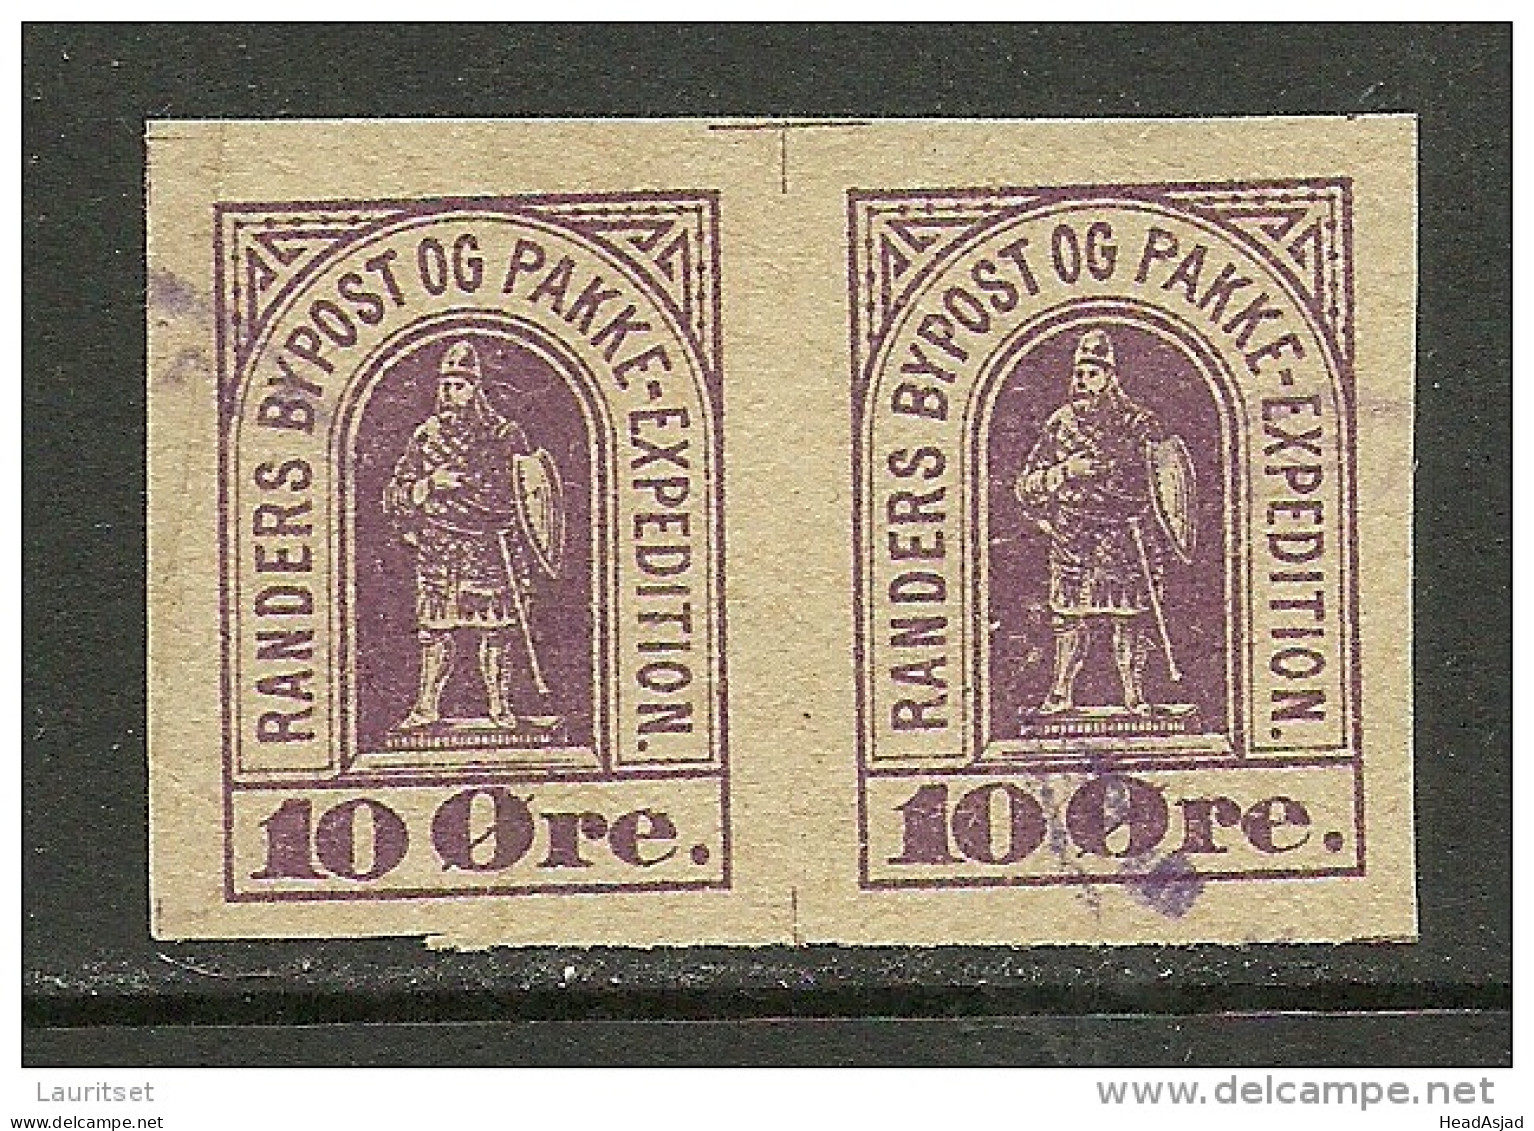 DENMARK 1887 RANDERS Lokalpost Local City Post Imperforated 10 öre In Pair O - Local Post Stamps